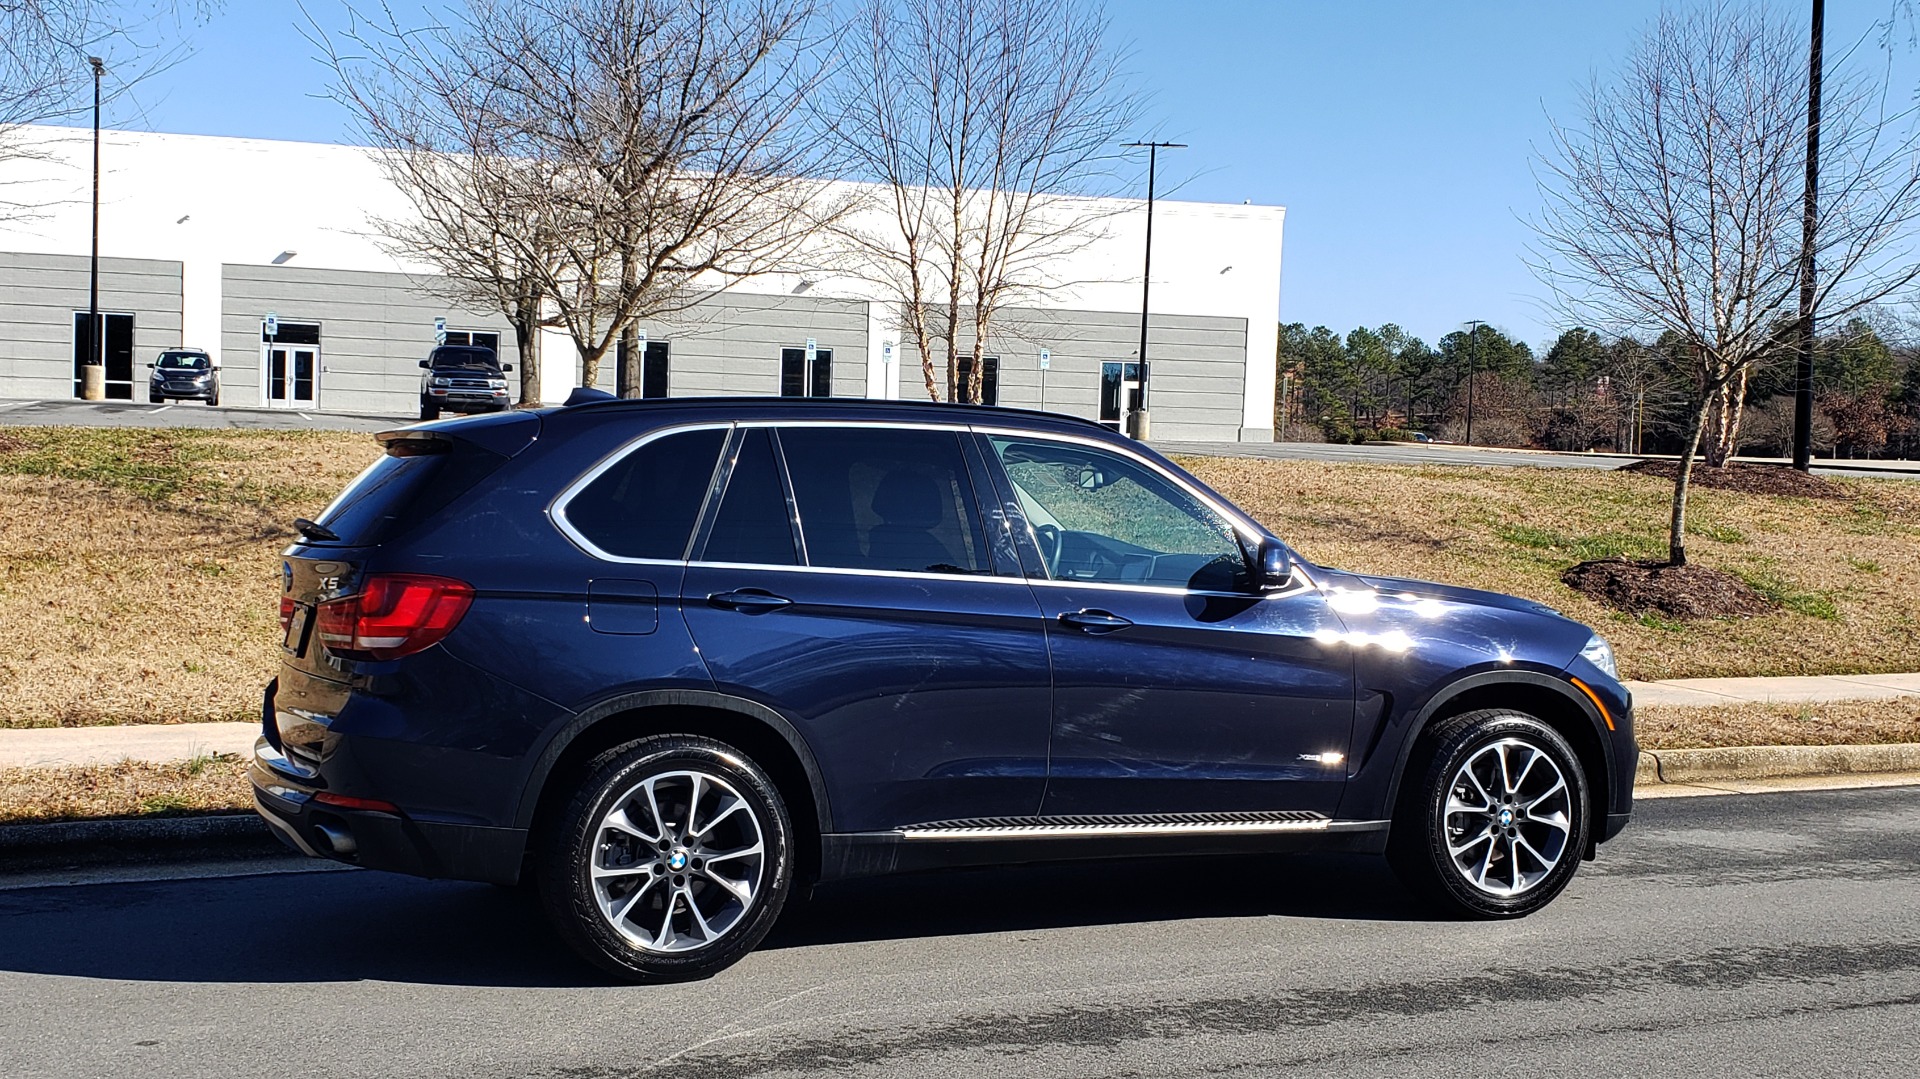 Used 2015 BMW X5 XDRIVE35I PREMIUM / NAV / XLINE / CLD WTHR / DRVR ASST / REARVIEW for sale Sold at Formula Imports in Charlotte NC 28227 8